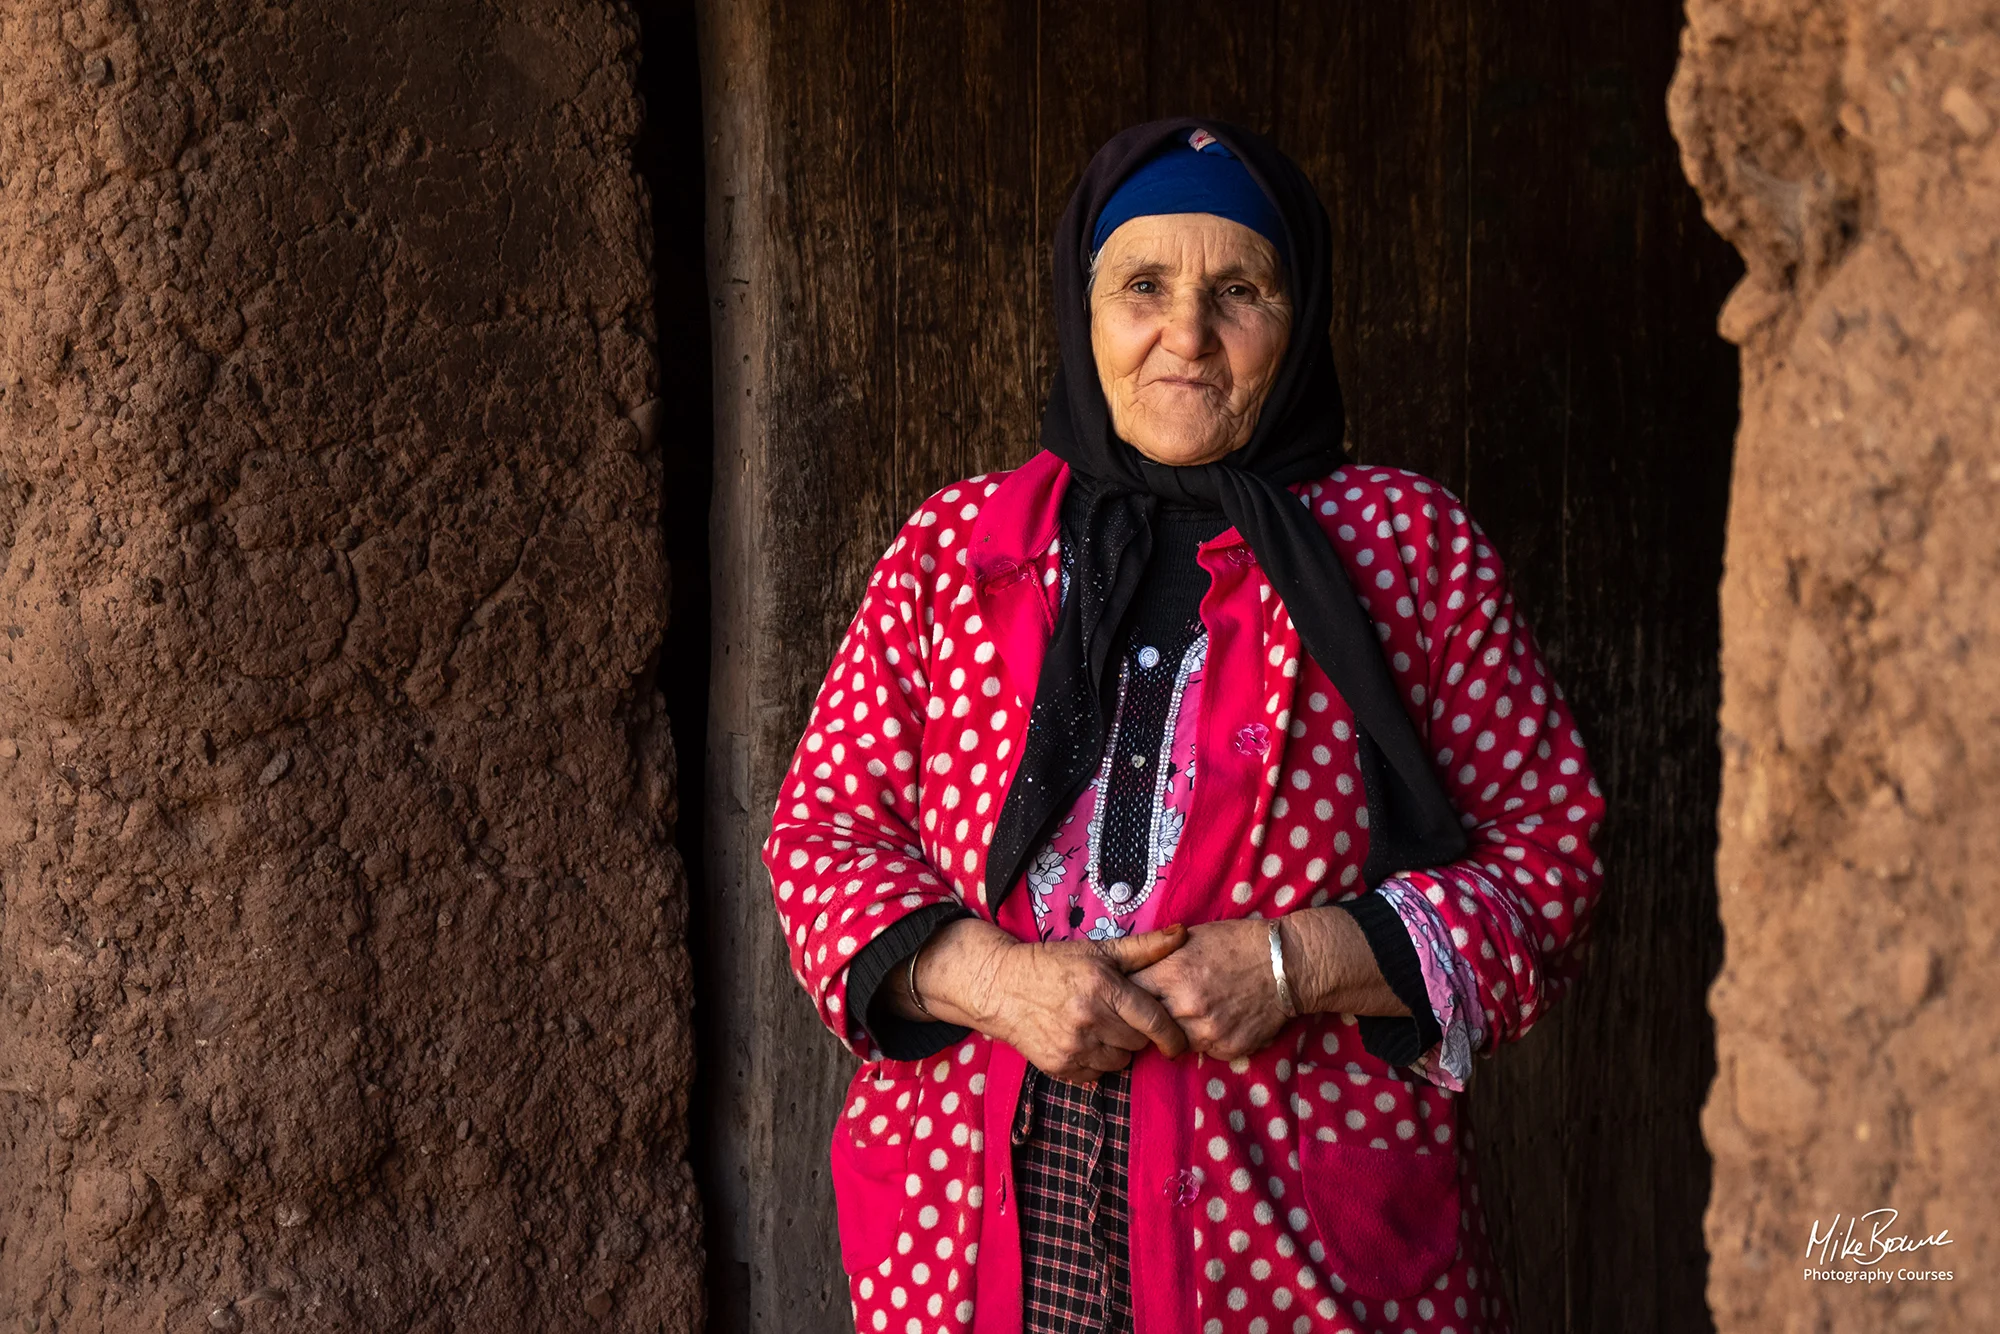 Elderly woman wearing red dress and hijab standing in doorway in village in Atlas Mountains of Morocco